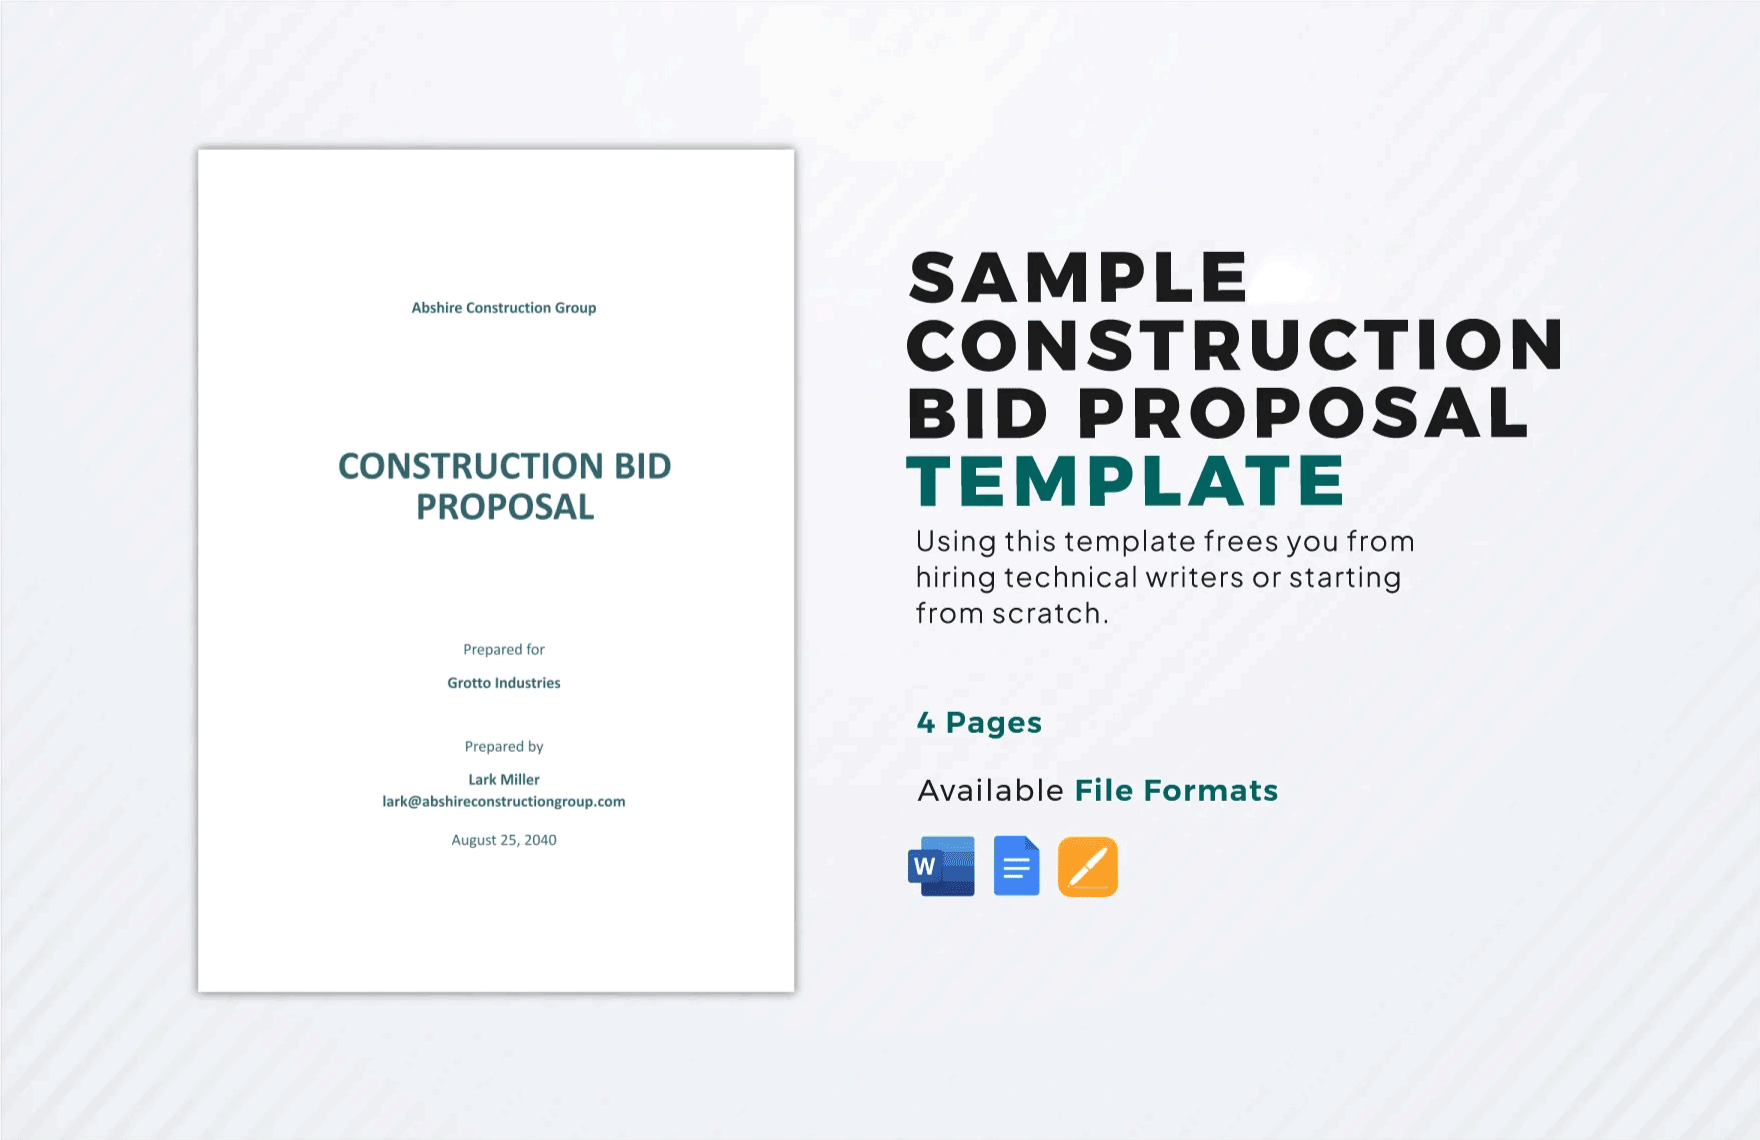 Free Sample Construction Bid Proposal Template in Word, Google Docs, Apple Pages